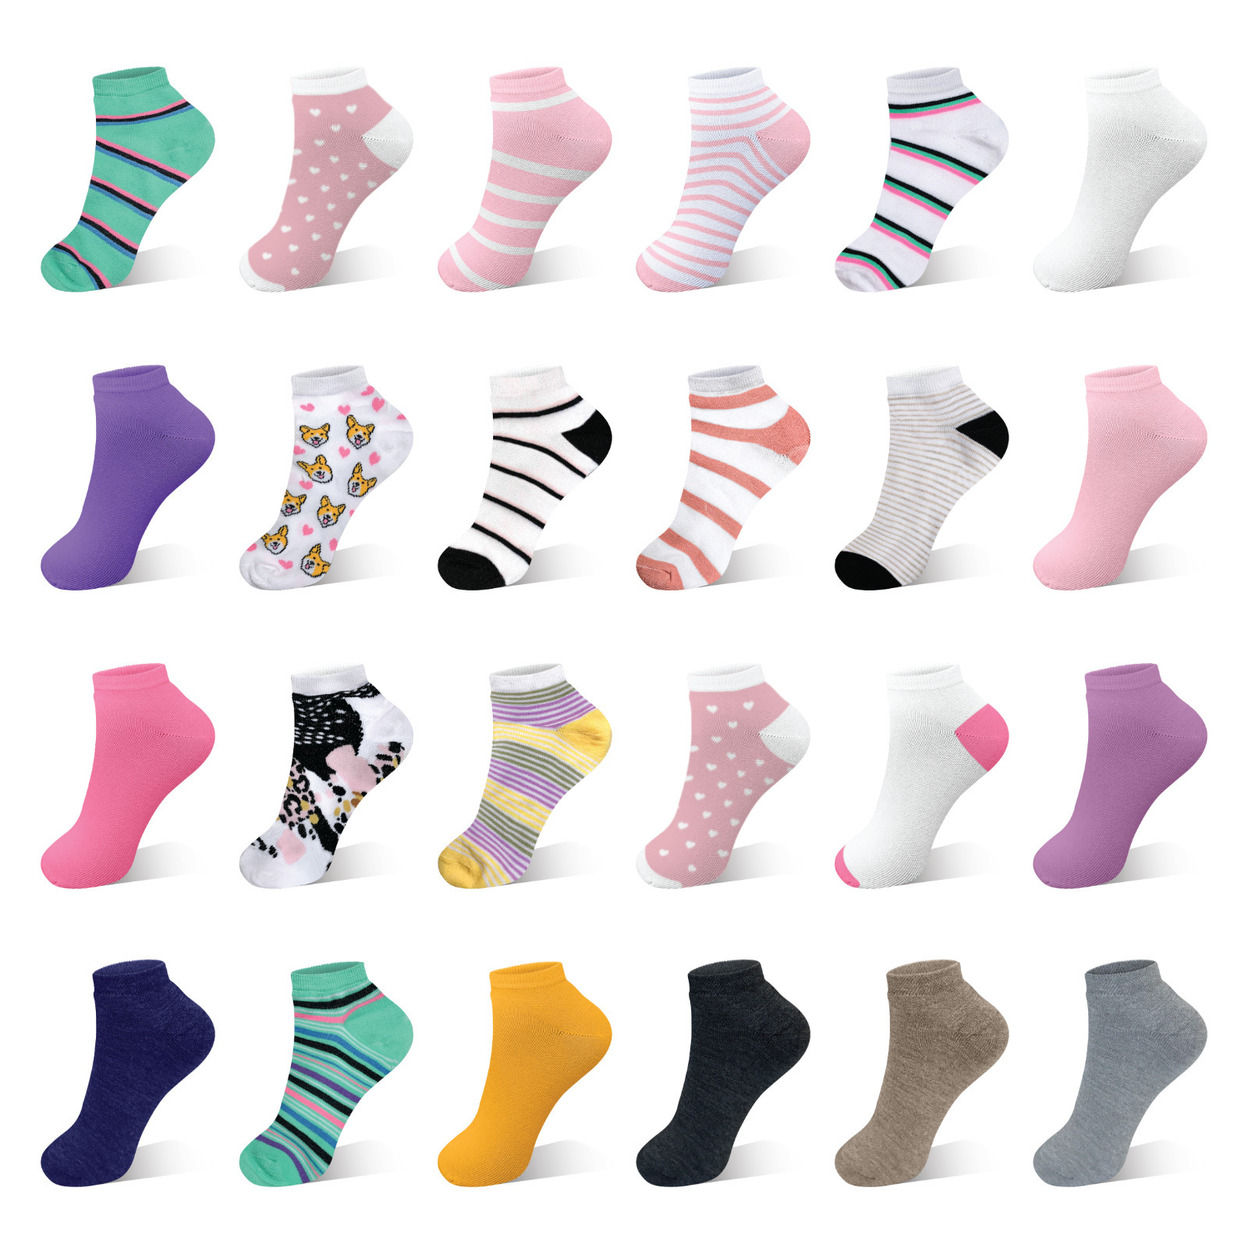 50-Pairs: Women’s Breathable Fun-Funky Colorful No Show Low Cut Ankle Socks